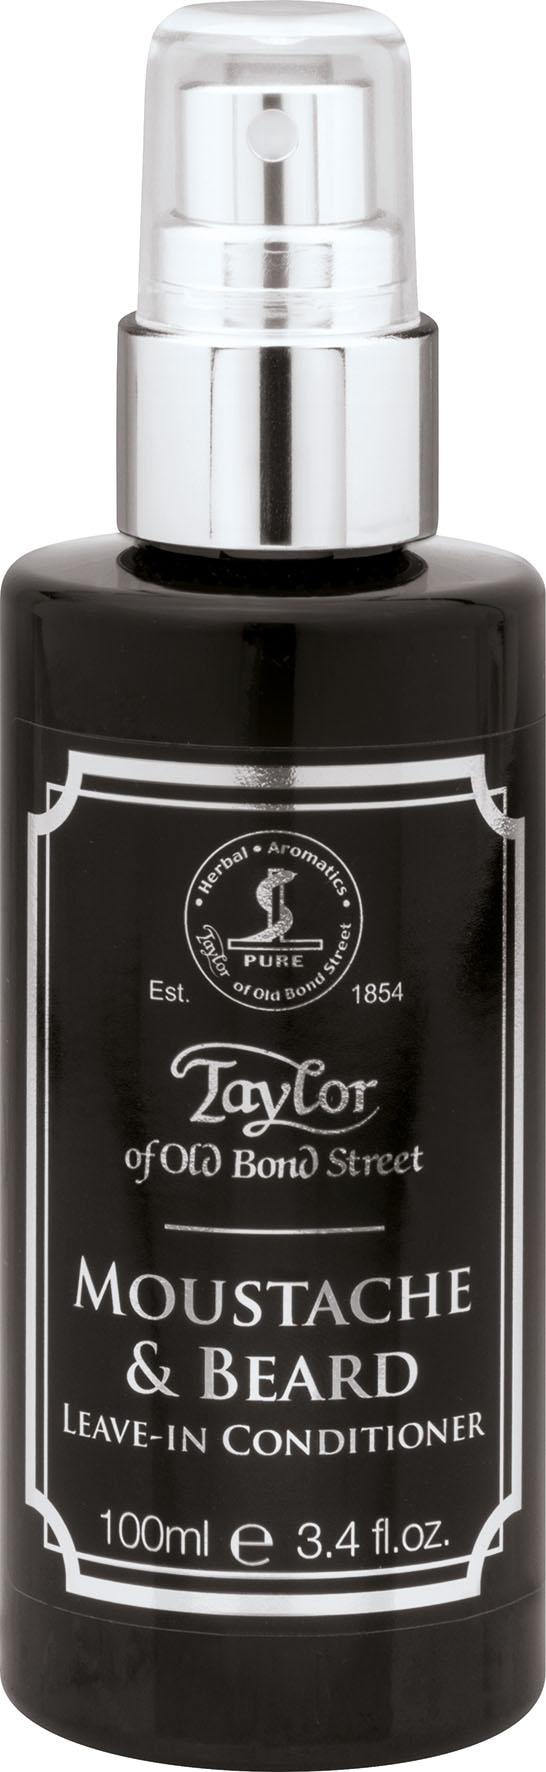 Taylor of Conditioner« Old »Moustache bei kaufen online Street OTTO Beard Bond & Bartconditioner Leave-In